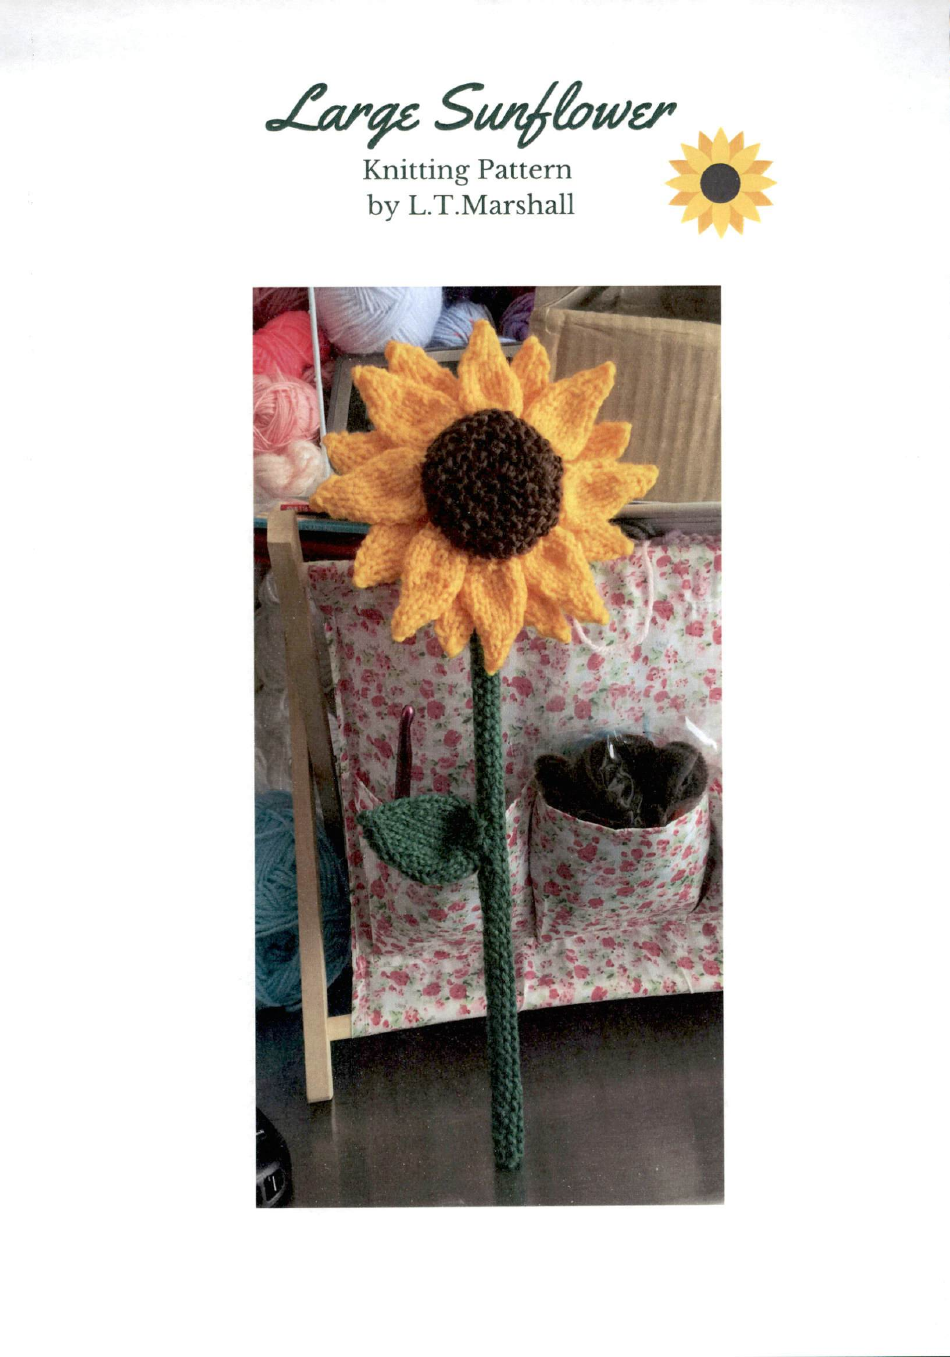 A visually appealing image preview of the Large Sunflower Knitting Pattern document.